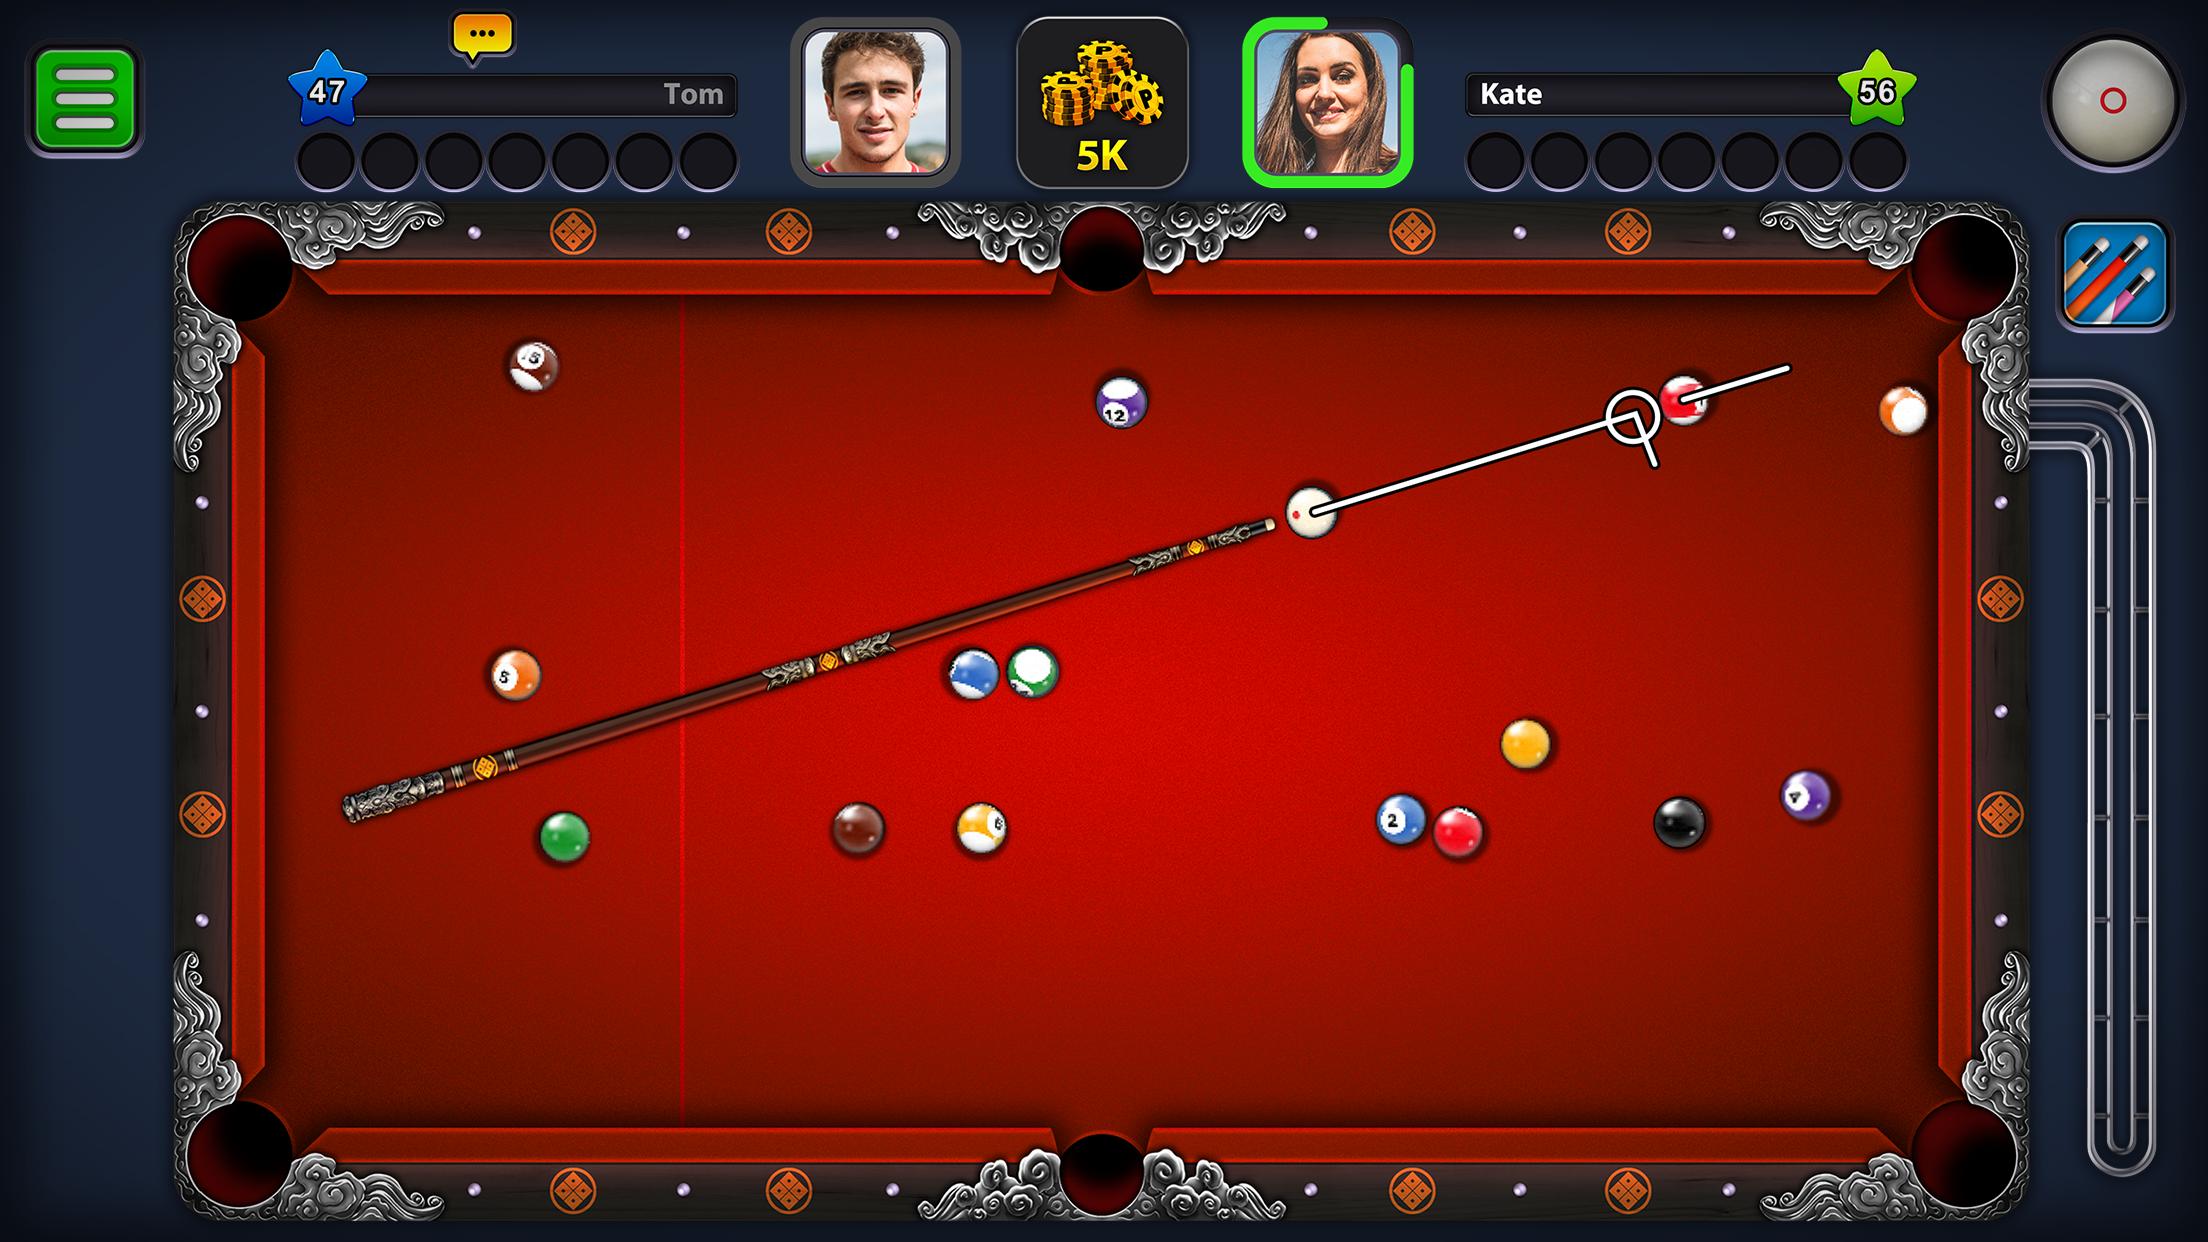 8 Ball Pool for Android - APK Download